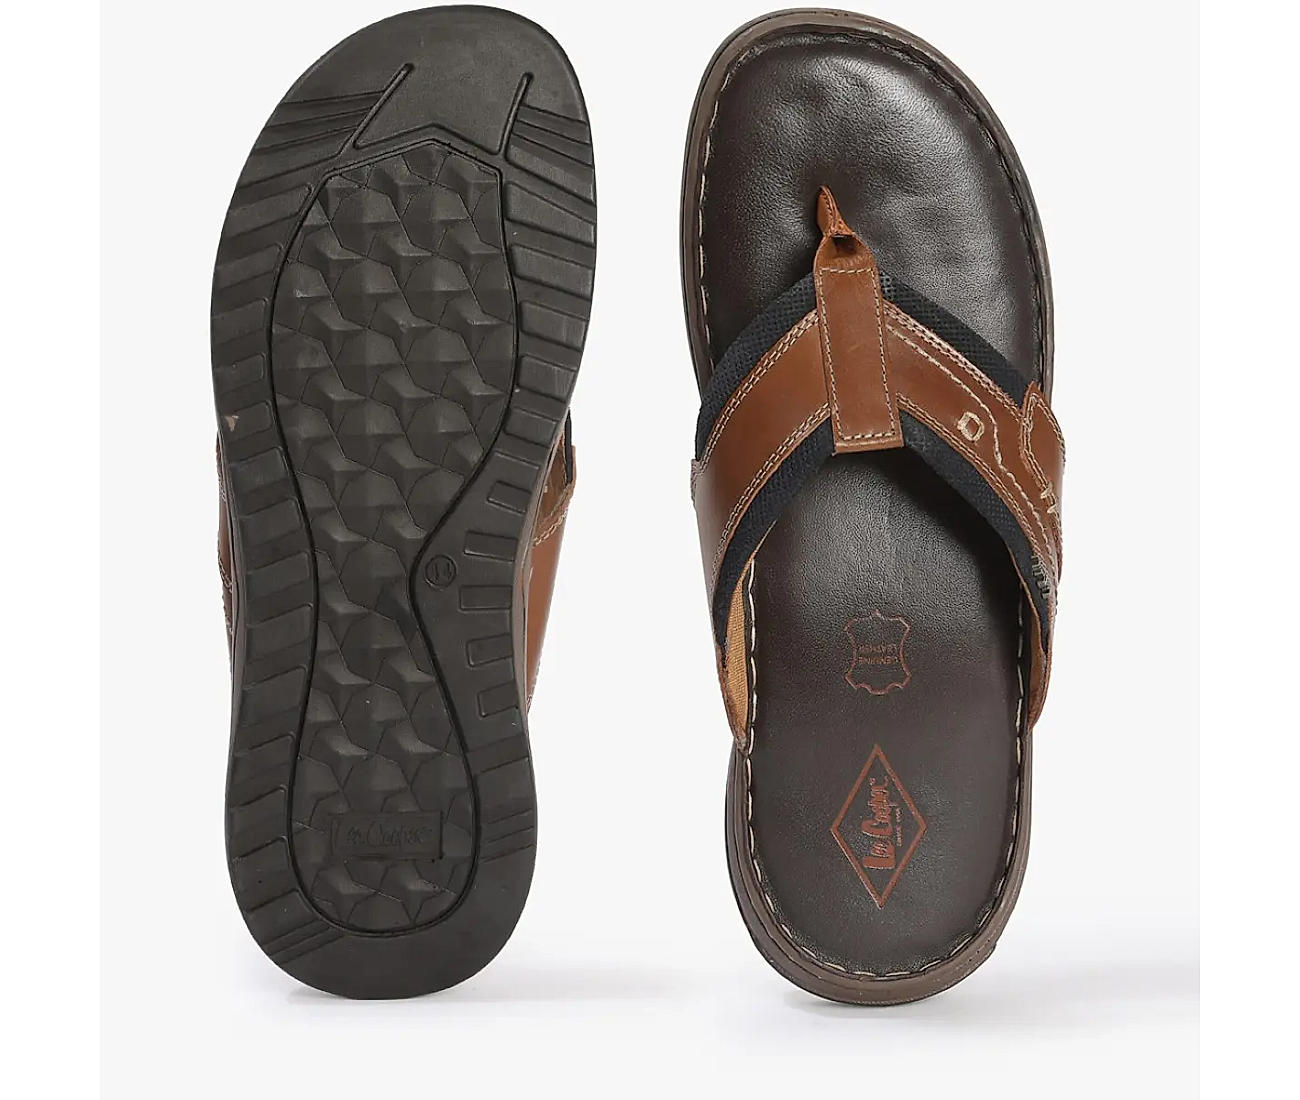 Step up your style game with the latest men's sandals in India